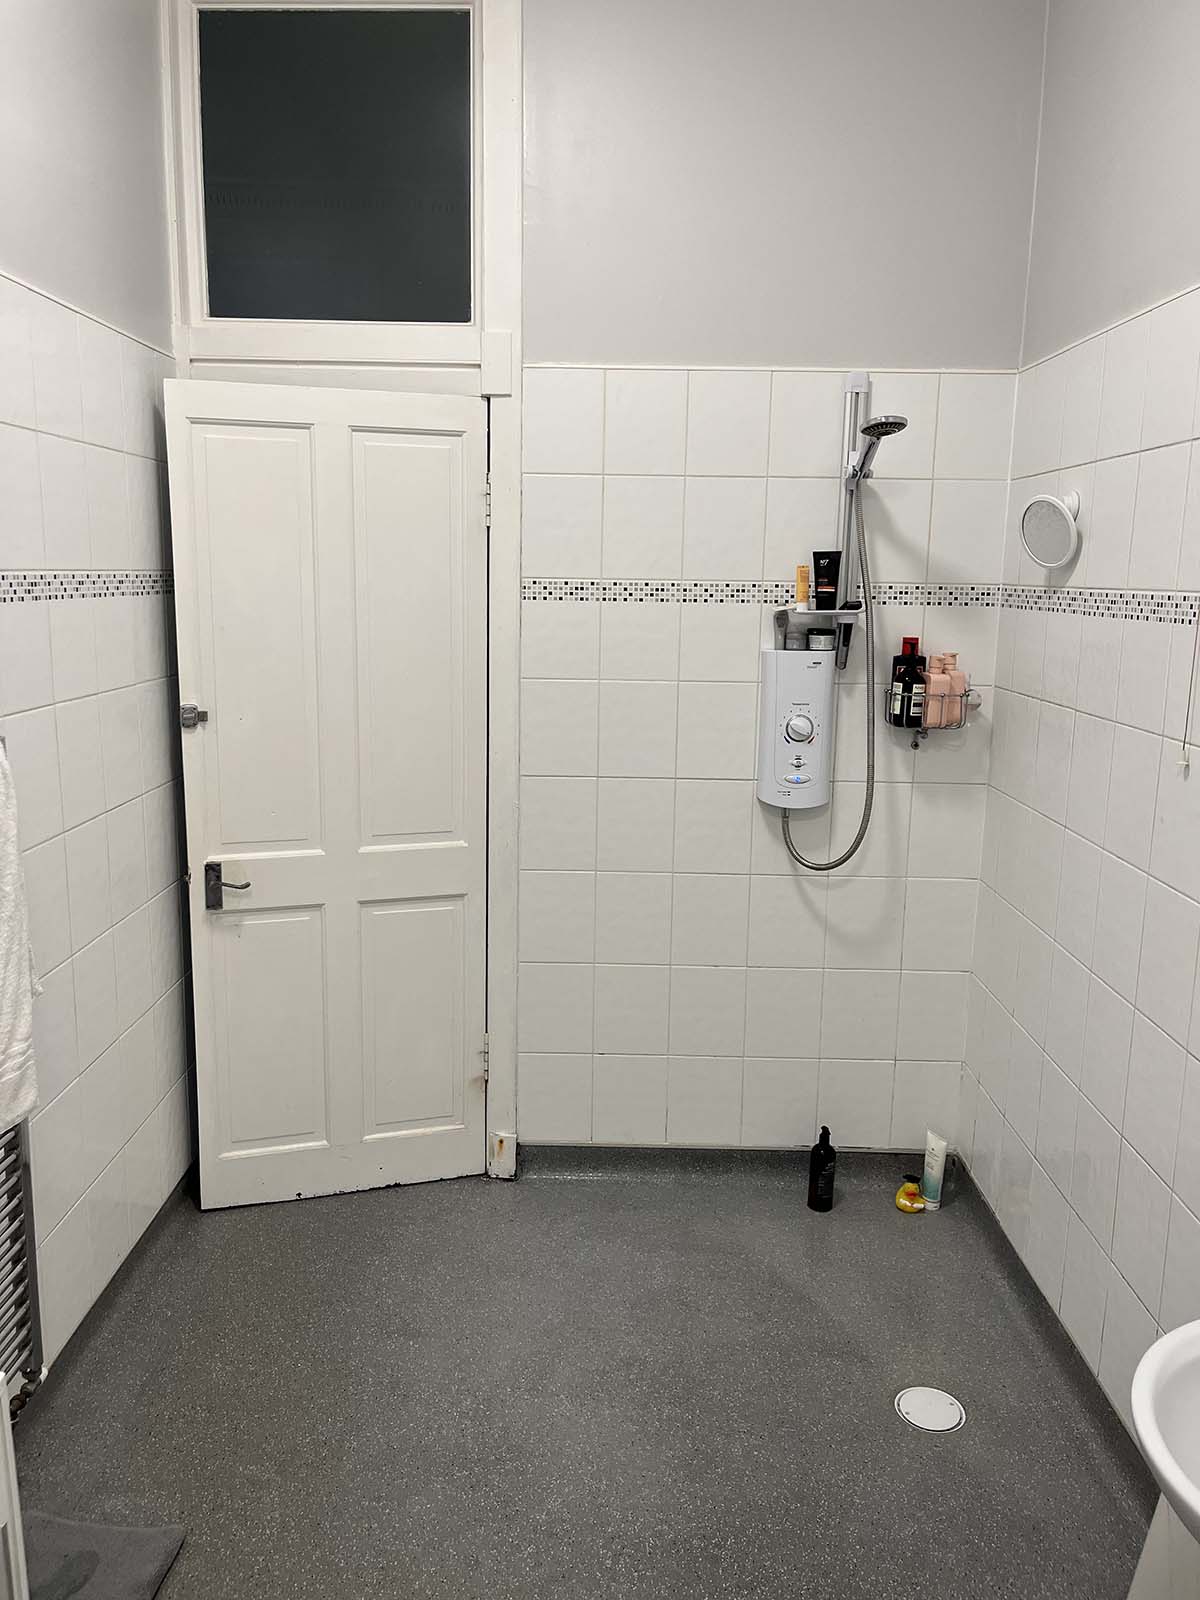 A bathroom with a wet room shower